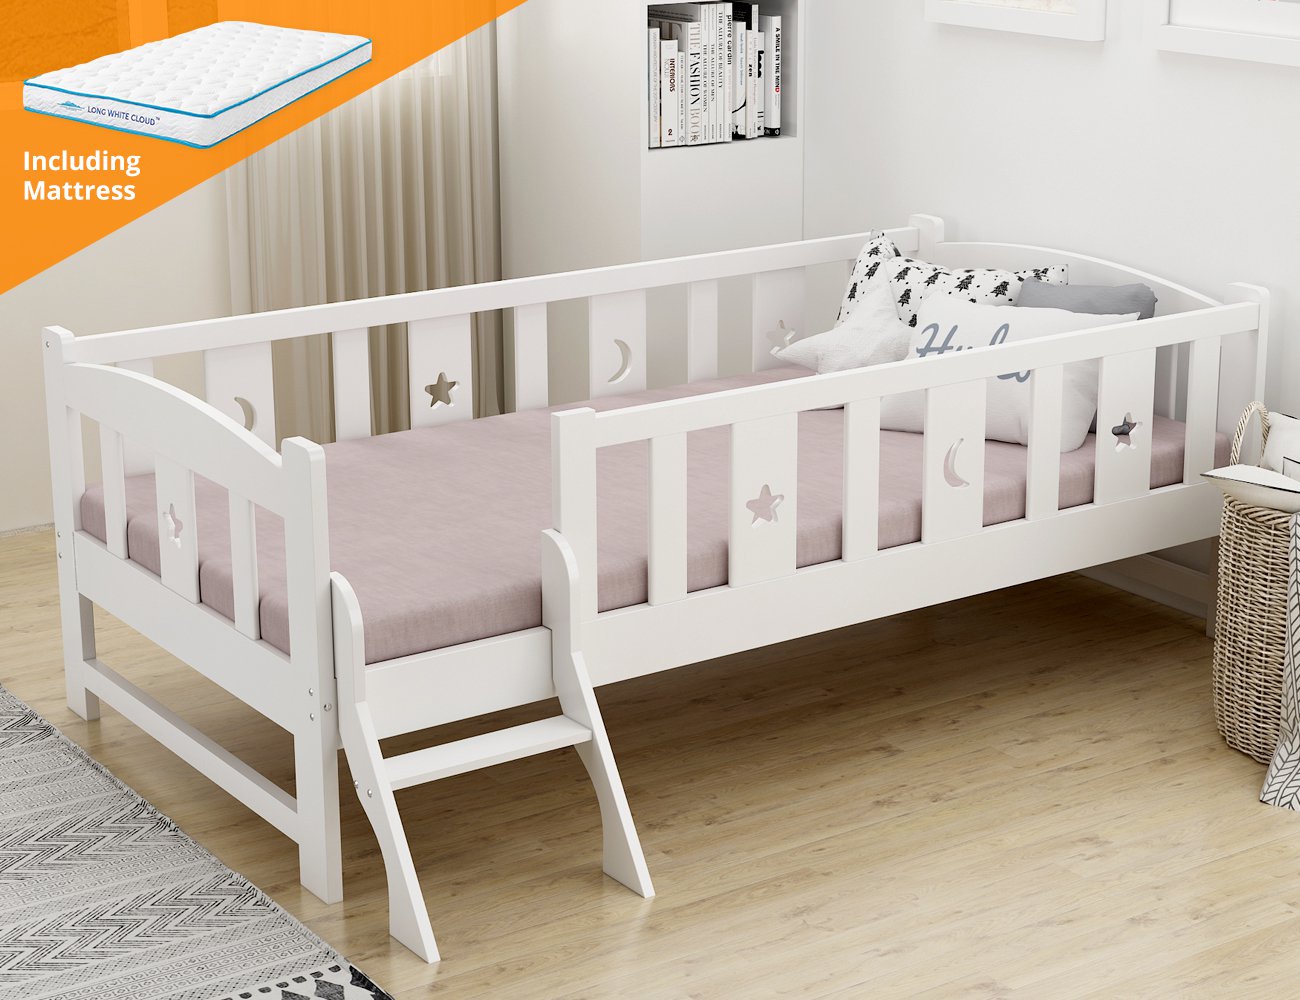 best single bed mattress for child